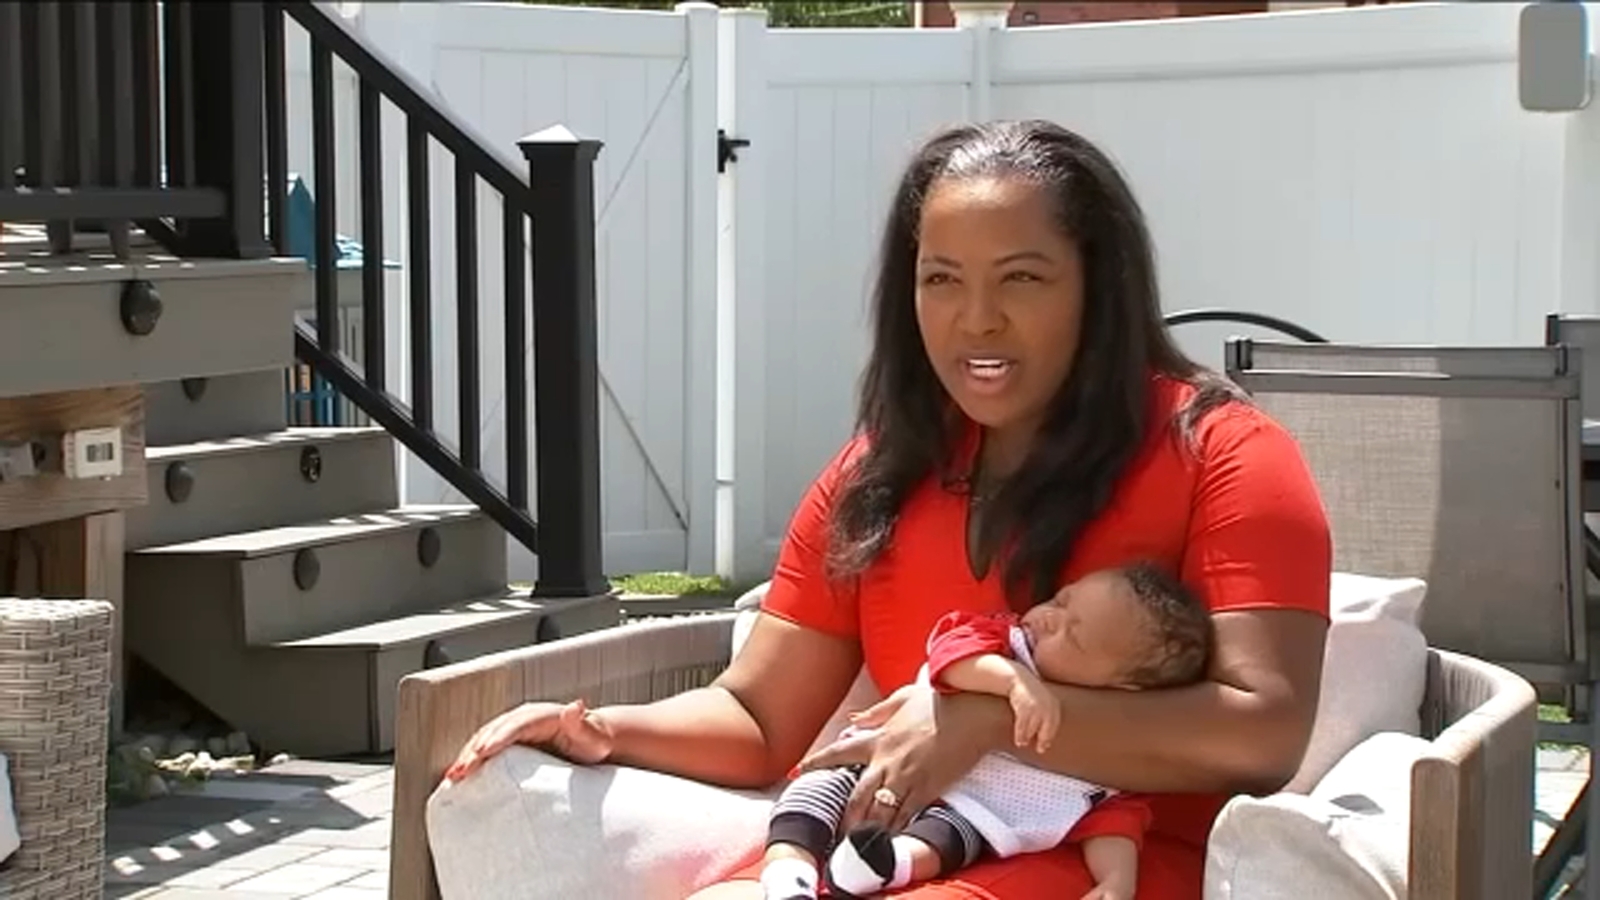 Tamiah Brevard-Rodriguez was working on her doctoral dissertation presentation from Rutgers when she went into early labor and gave birth in the car. [Video]